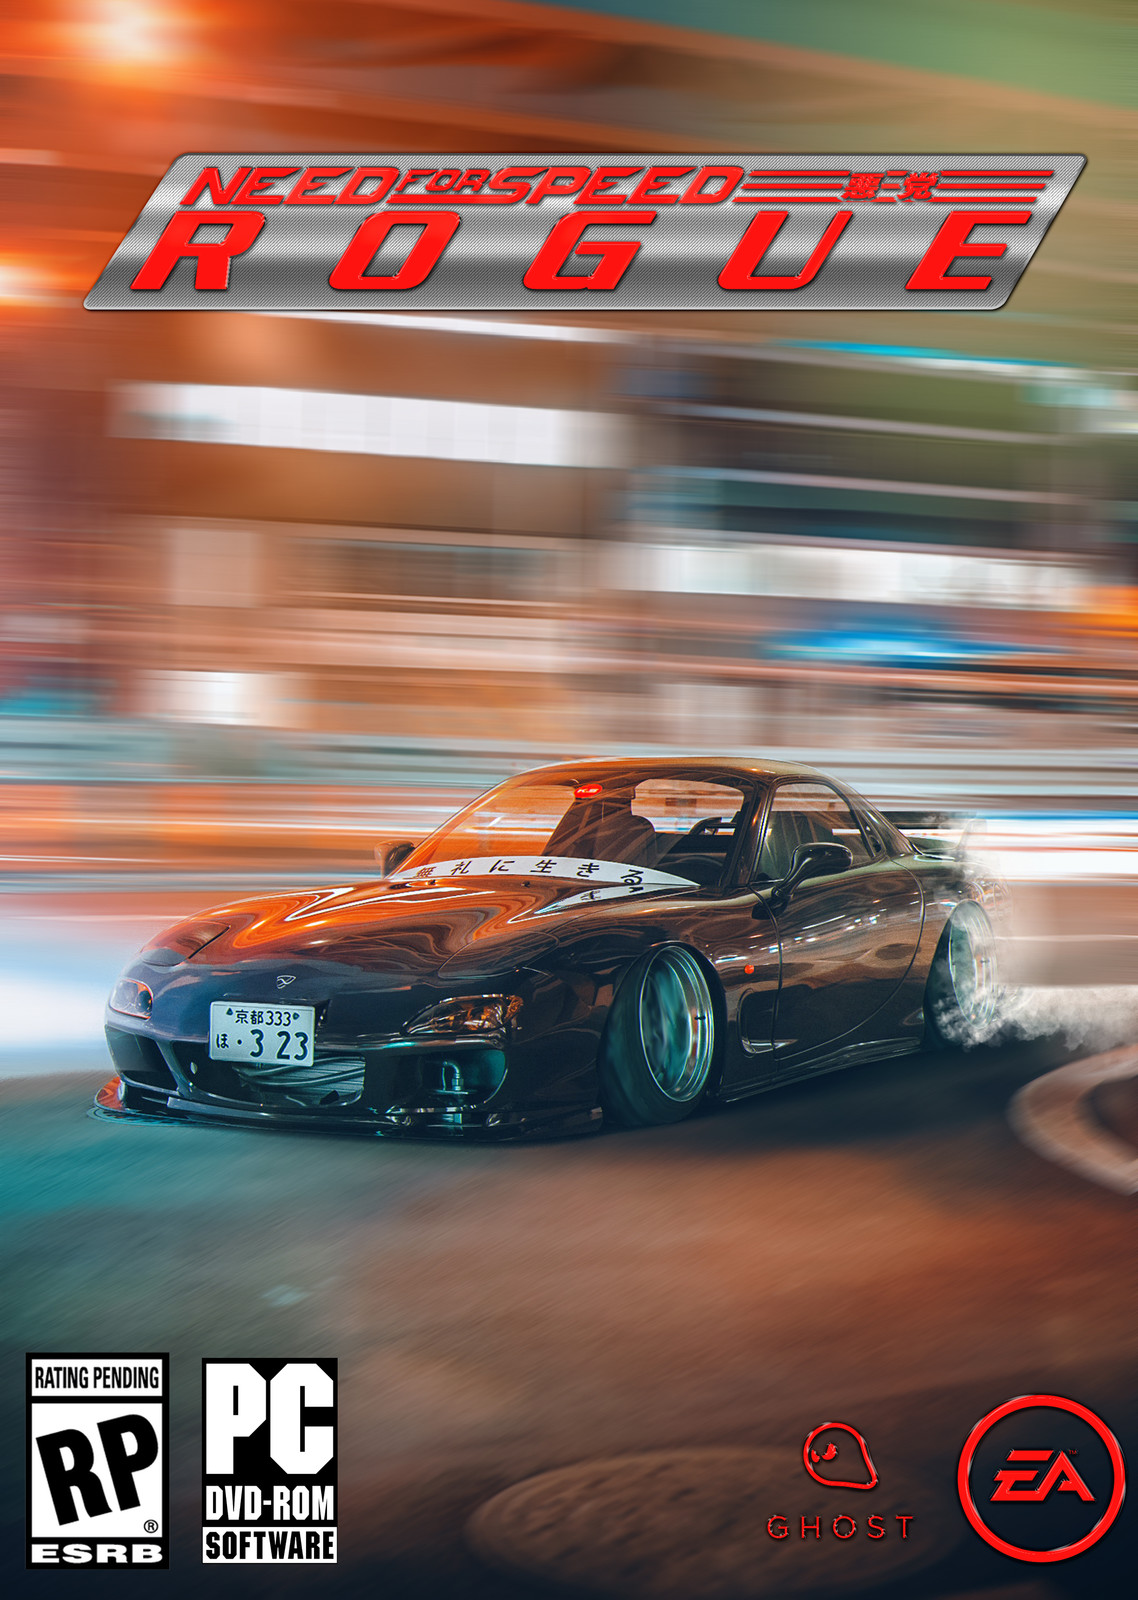 Need for Speed Rogue (EU Cover - Classic) [Original Image by Khyzyl Saleem]